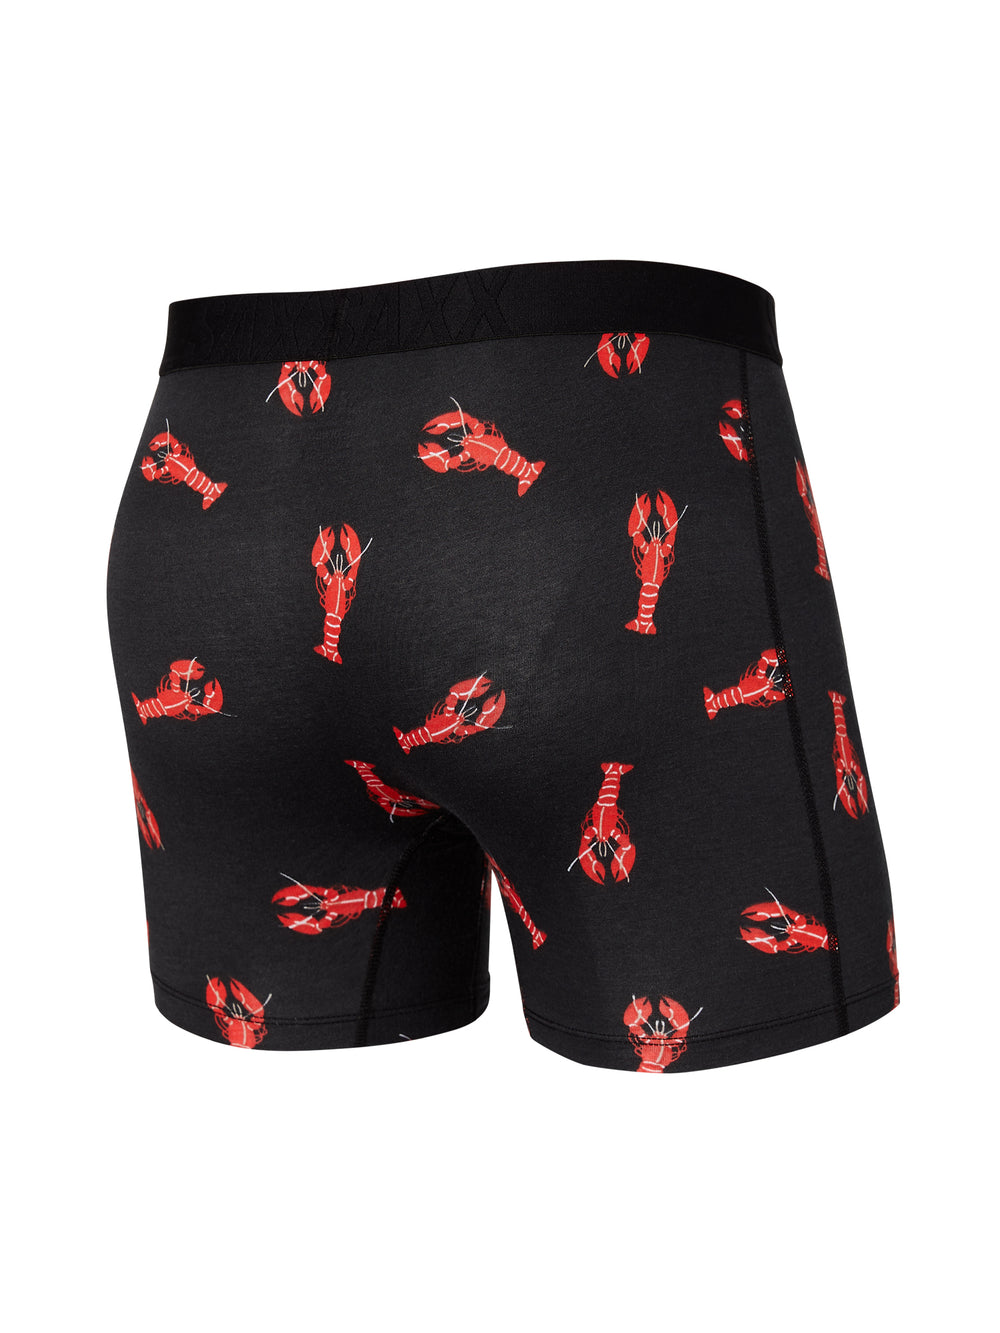 SAXX UNDERCOVER BOXER BRIEF - OH SNAP LOBSTER - DÉSTOCKAGE